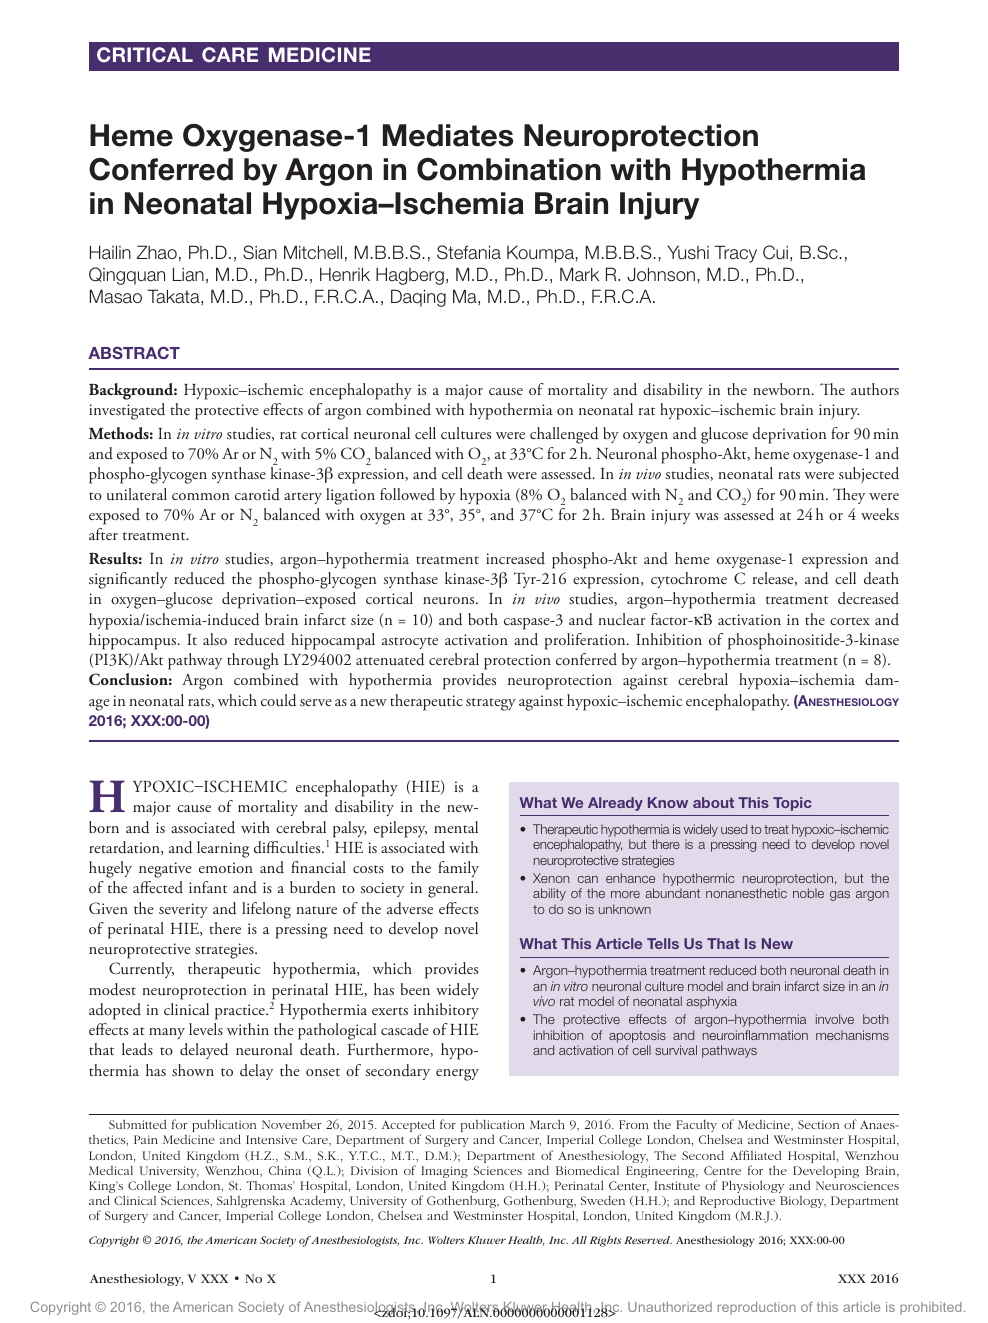 Characteristics and short-term outcomes of neonates with mild hypoxic-ischemic  encephalopathy treated with hypothermia